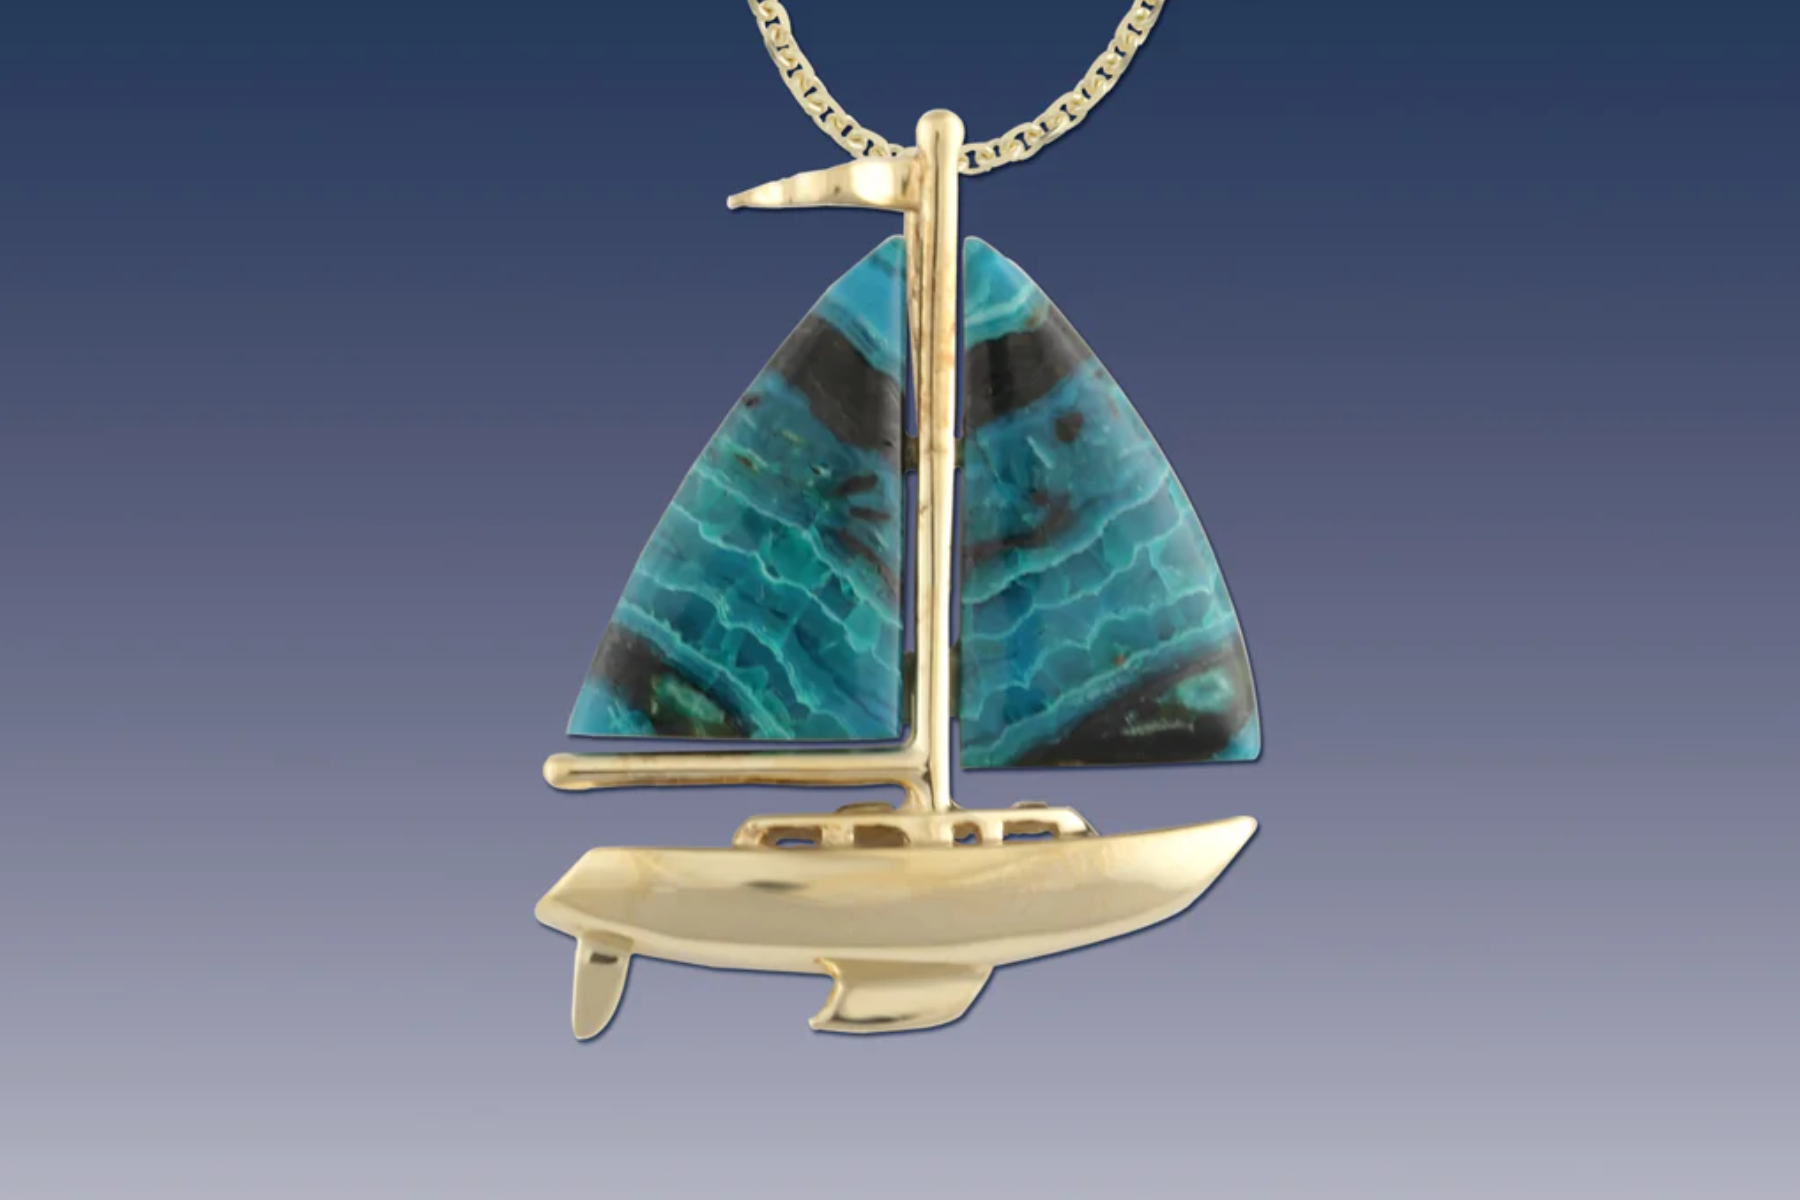 A pendant in the shape of a sailboat placed on a background with a gradient of blue colors